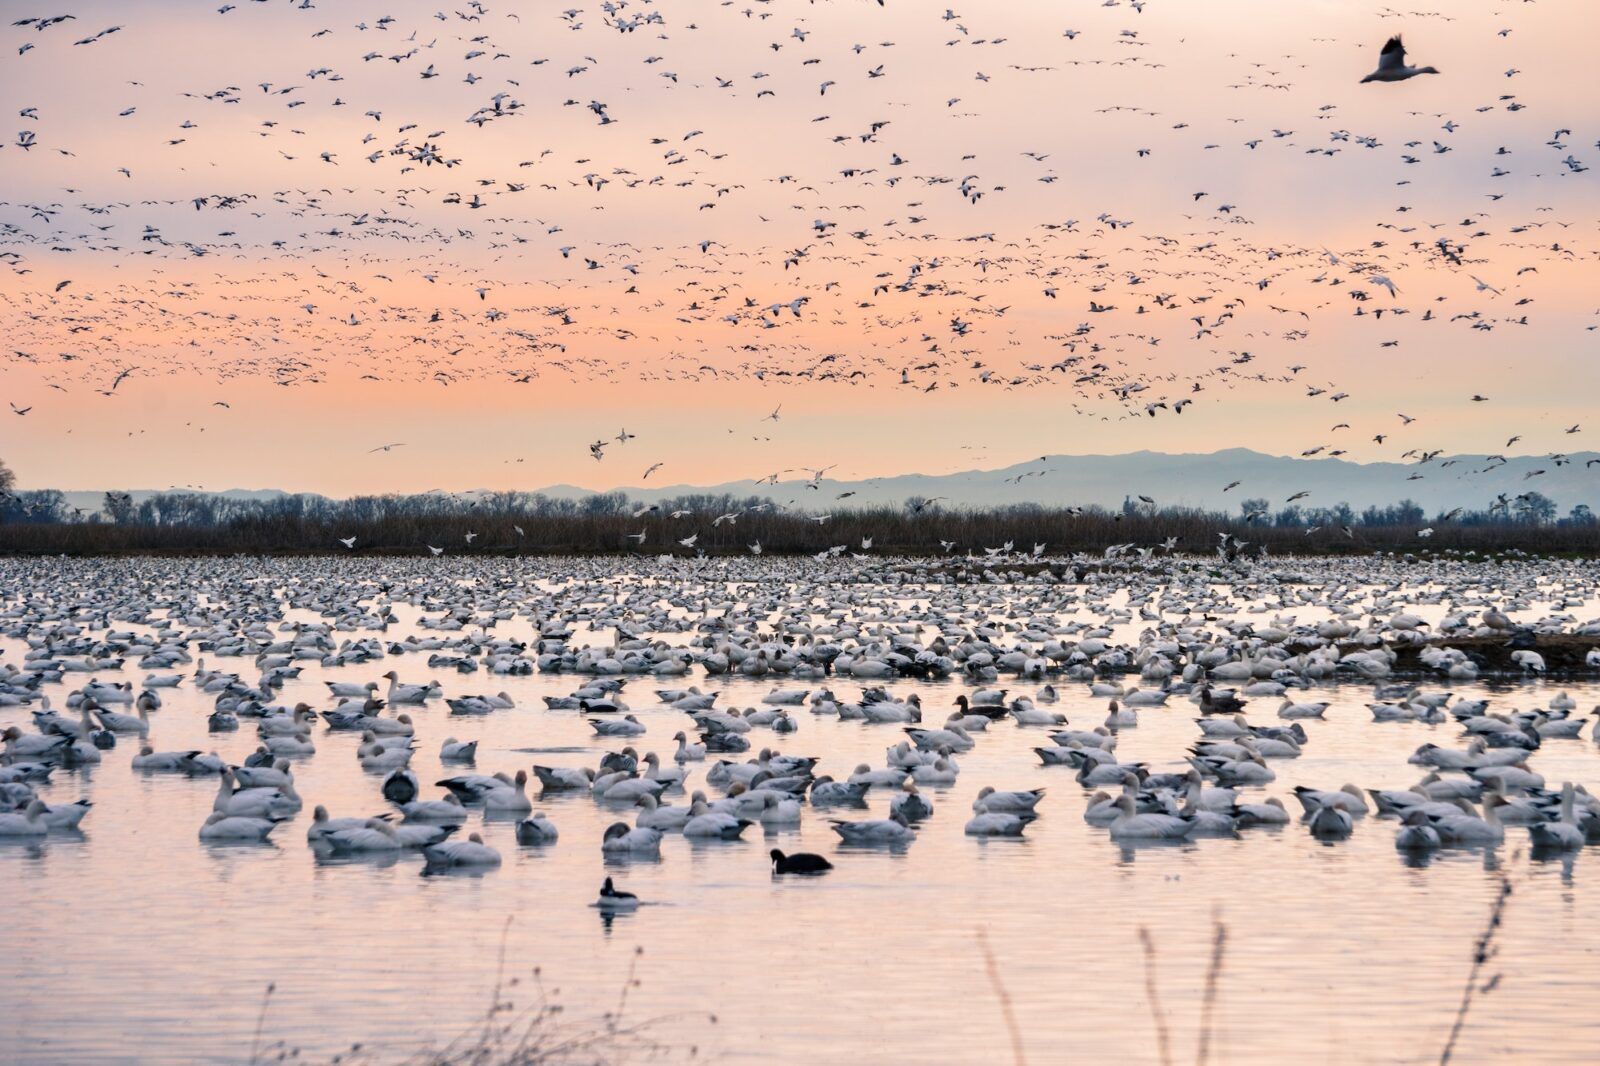 A flock of snow geese wintering on a pond in Sacramento National Wildlife Refuge, California